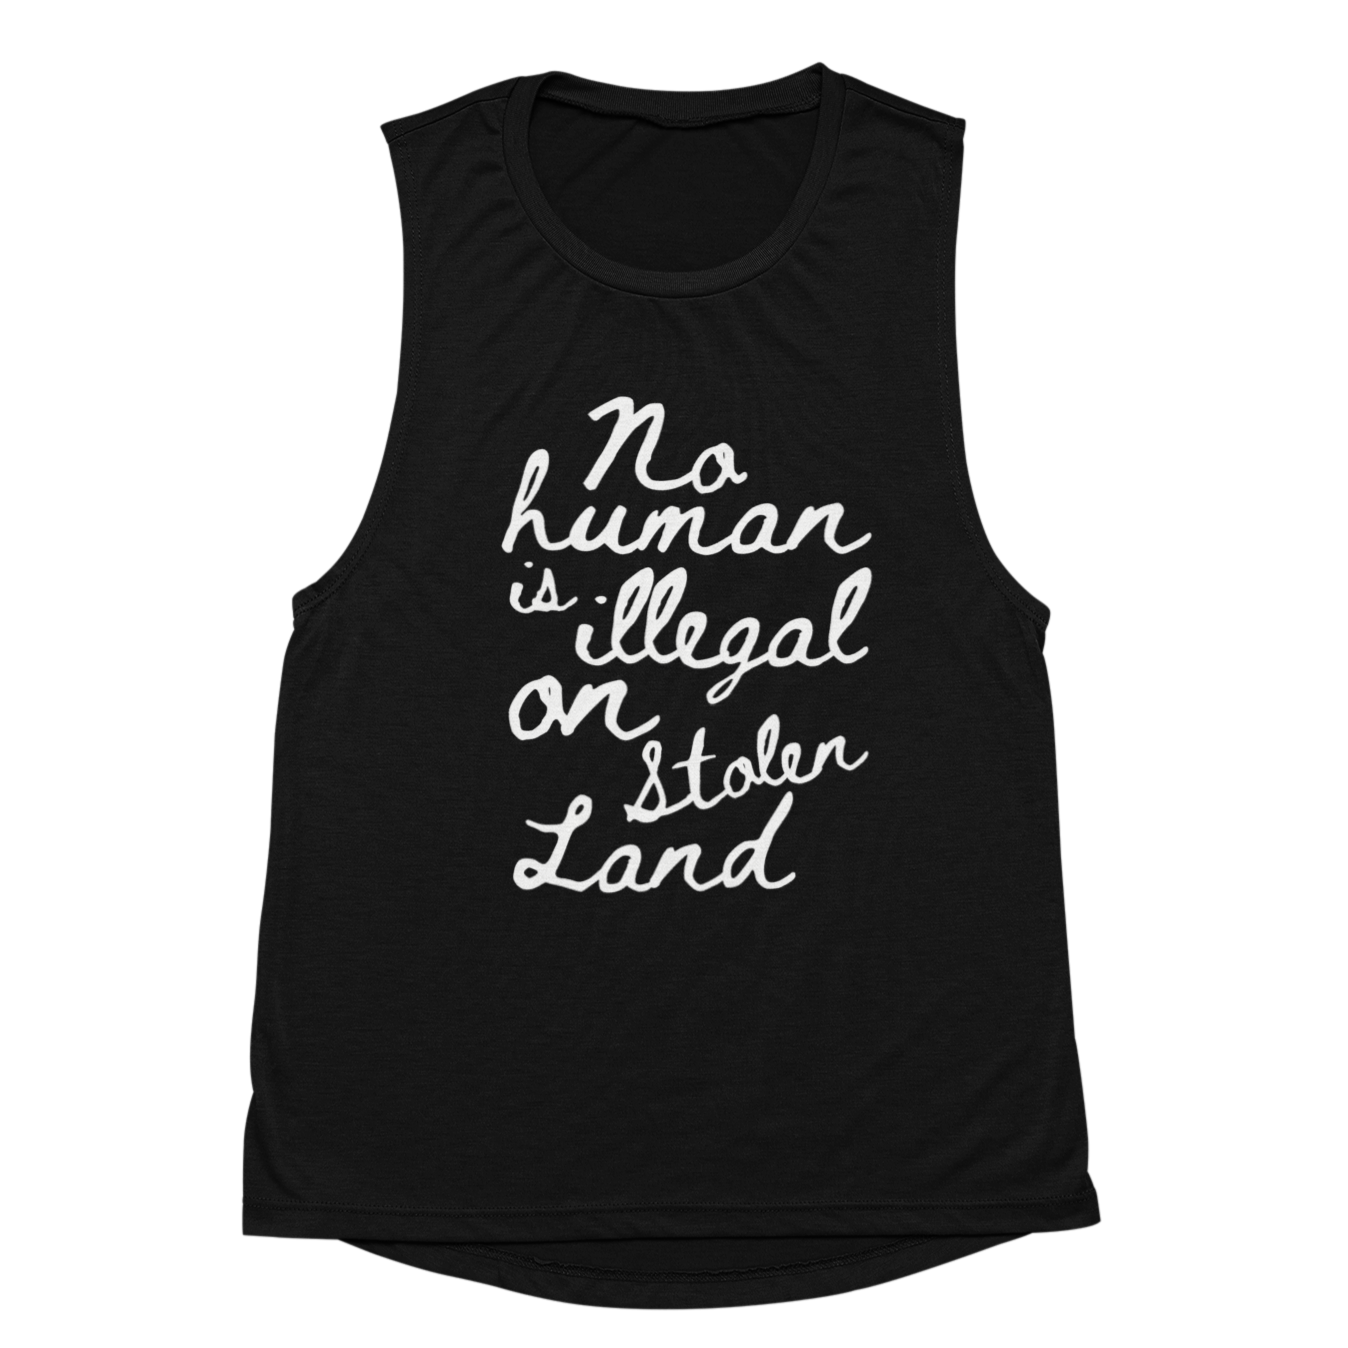 women's activism shirt, 'No human is illegal on stolen land' muscle tank top in white handwritten text on black